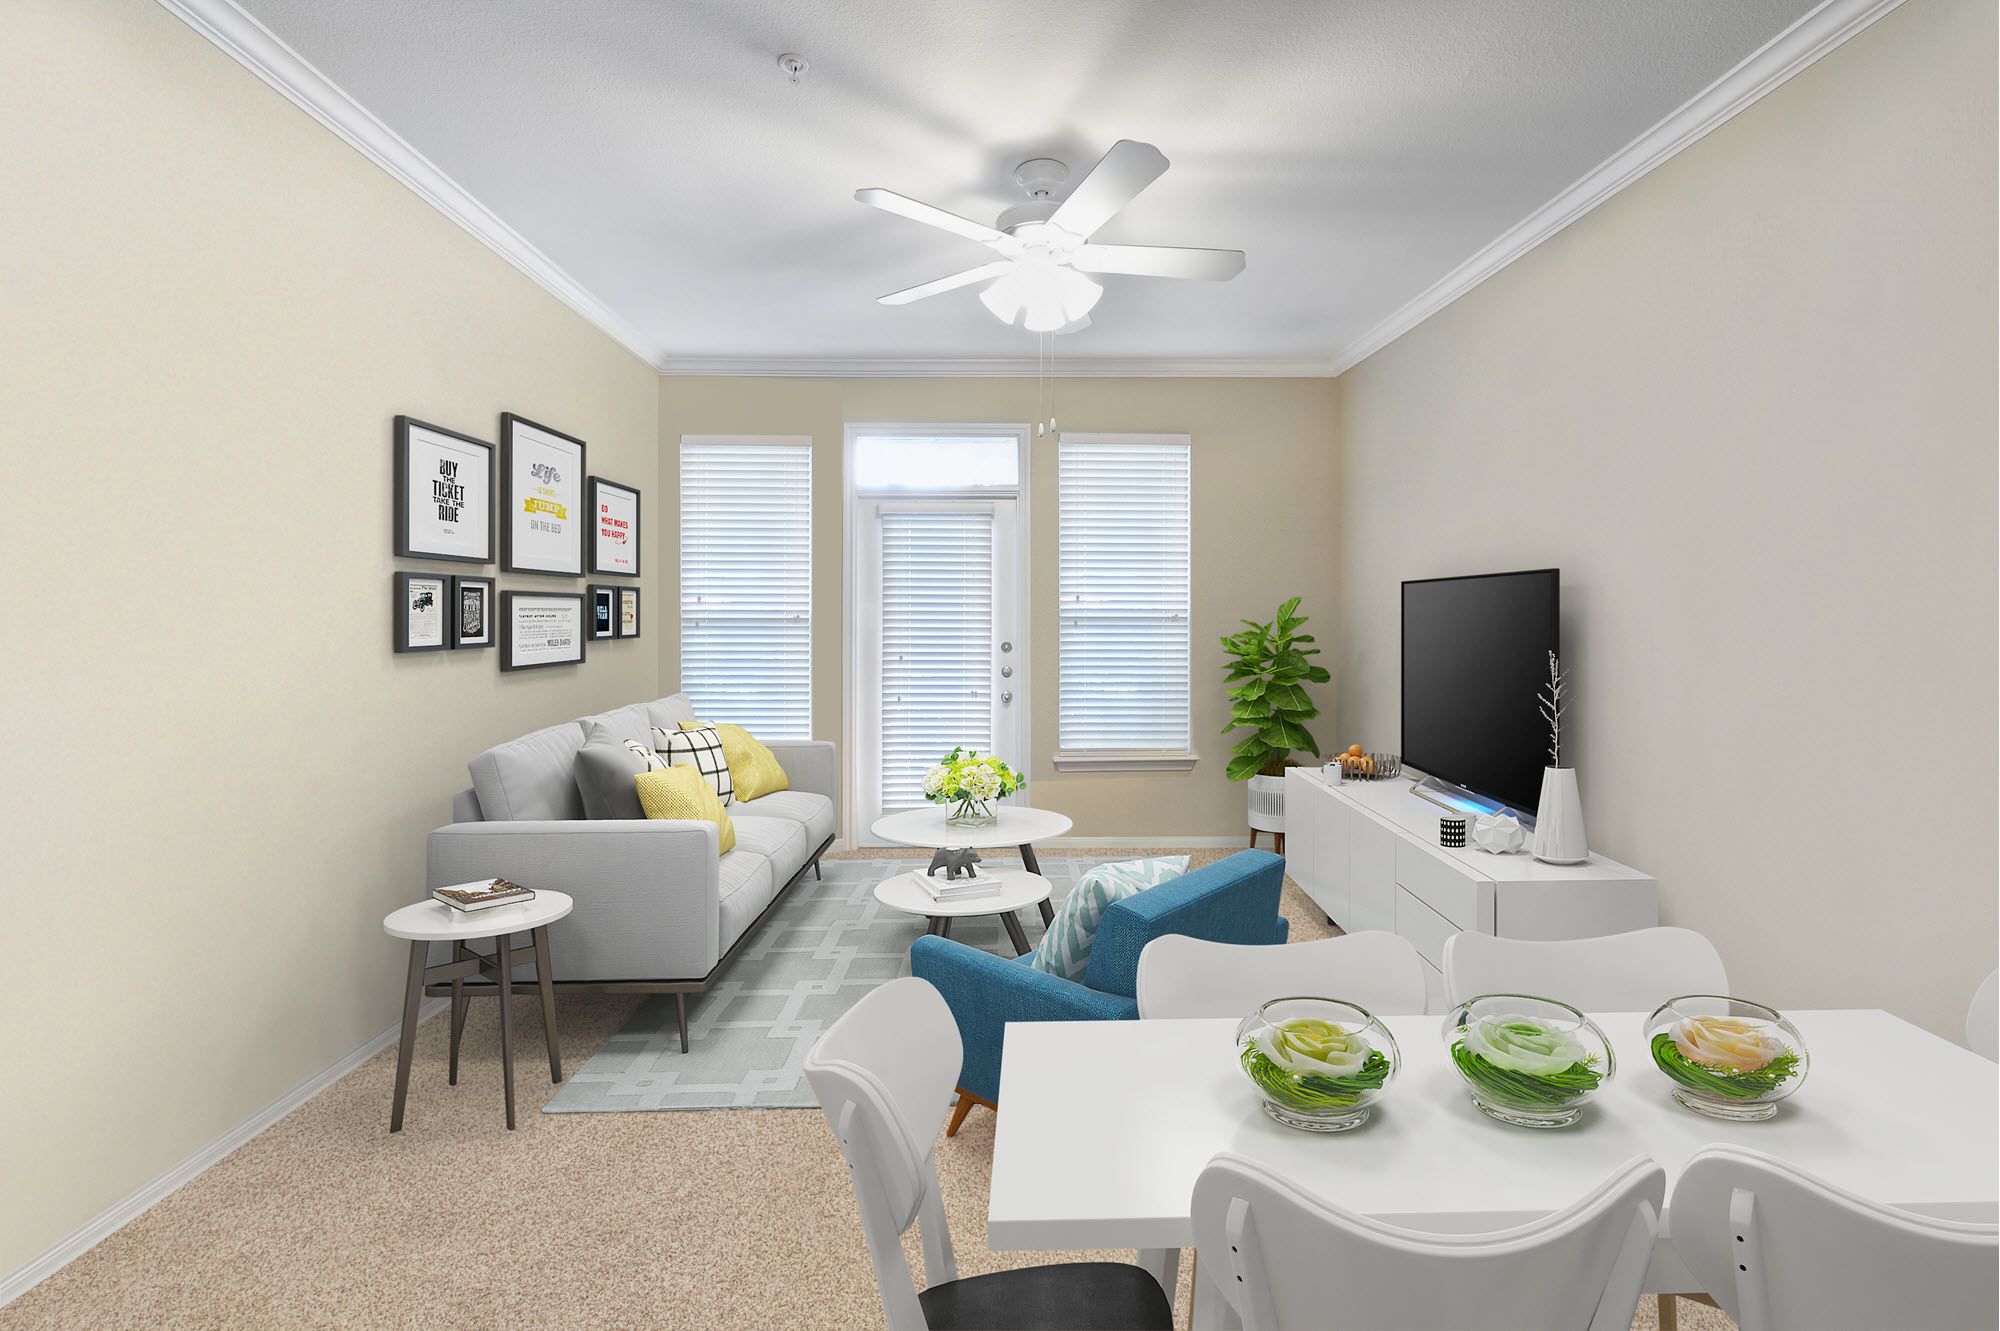 Living and dining area with carpet, ceiling fan, and crown molding